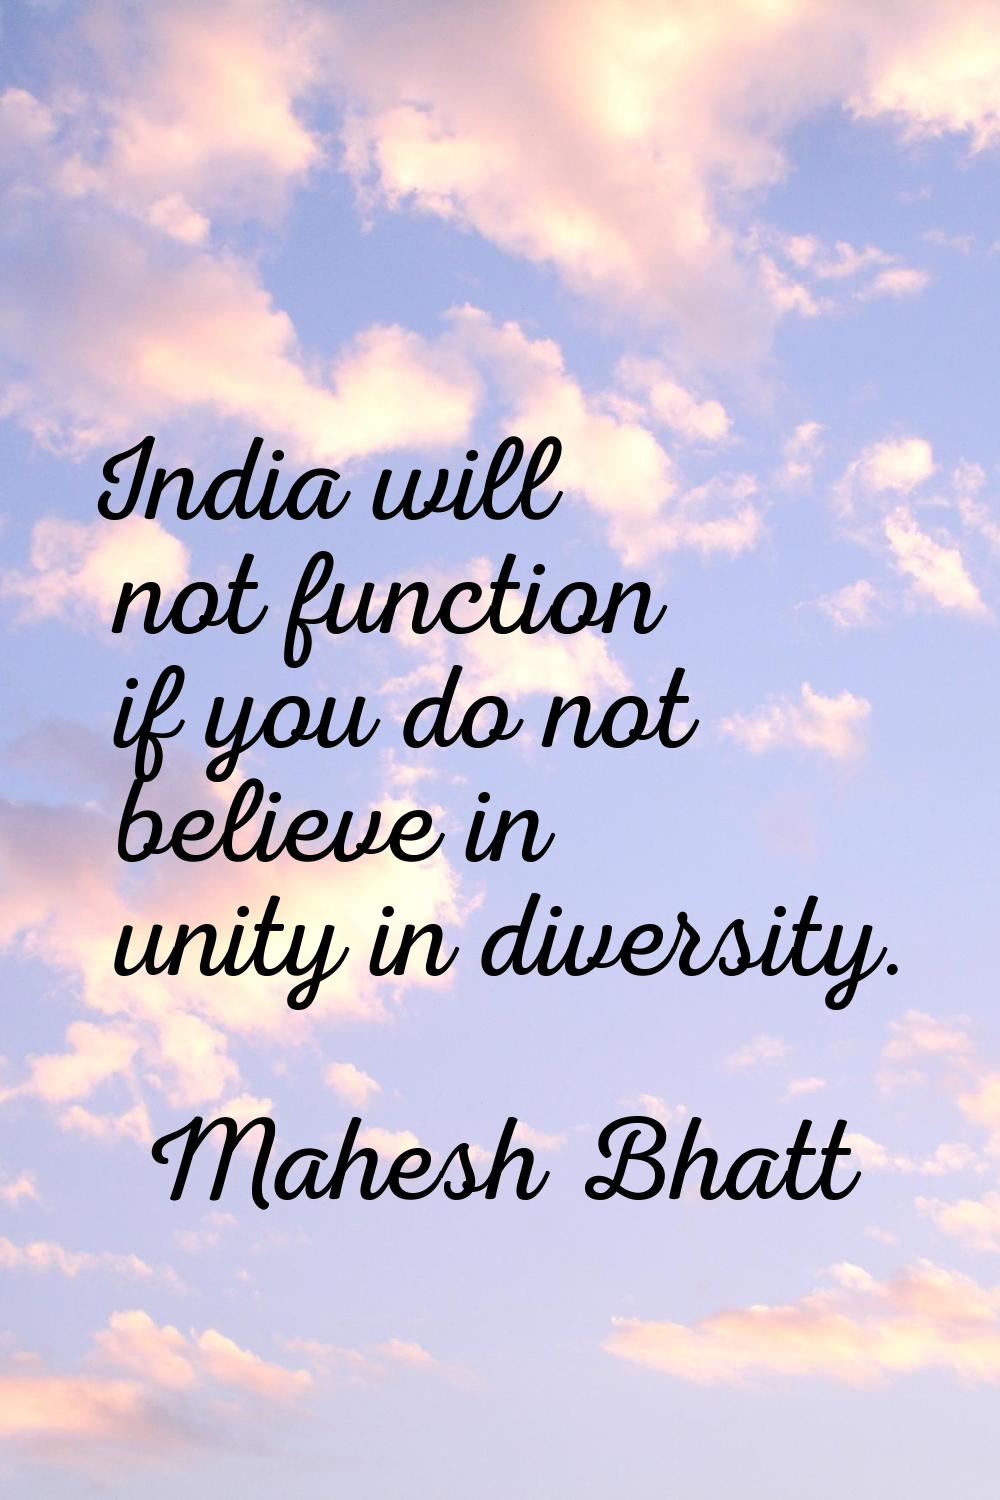 India will not function if you do not believe in unity in diversity.